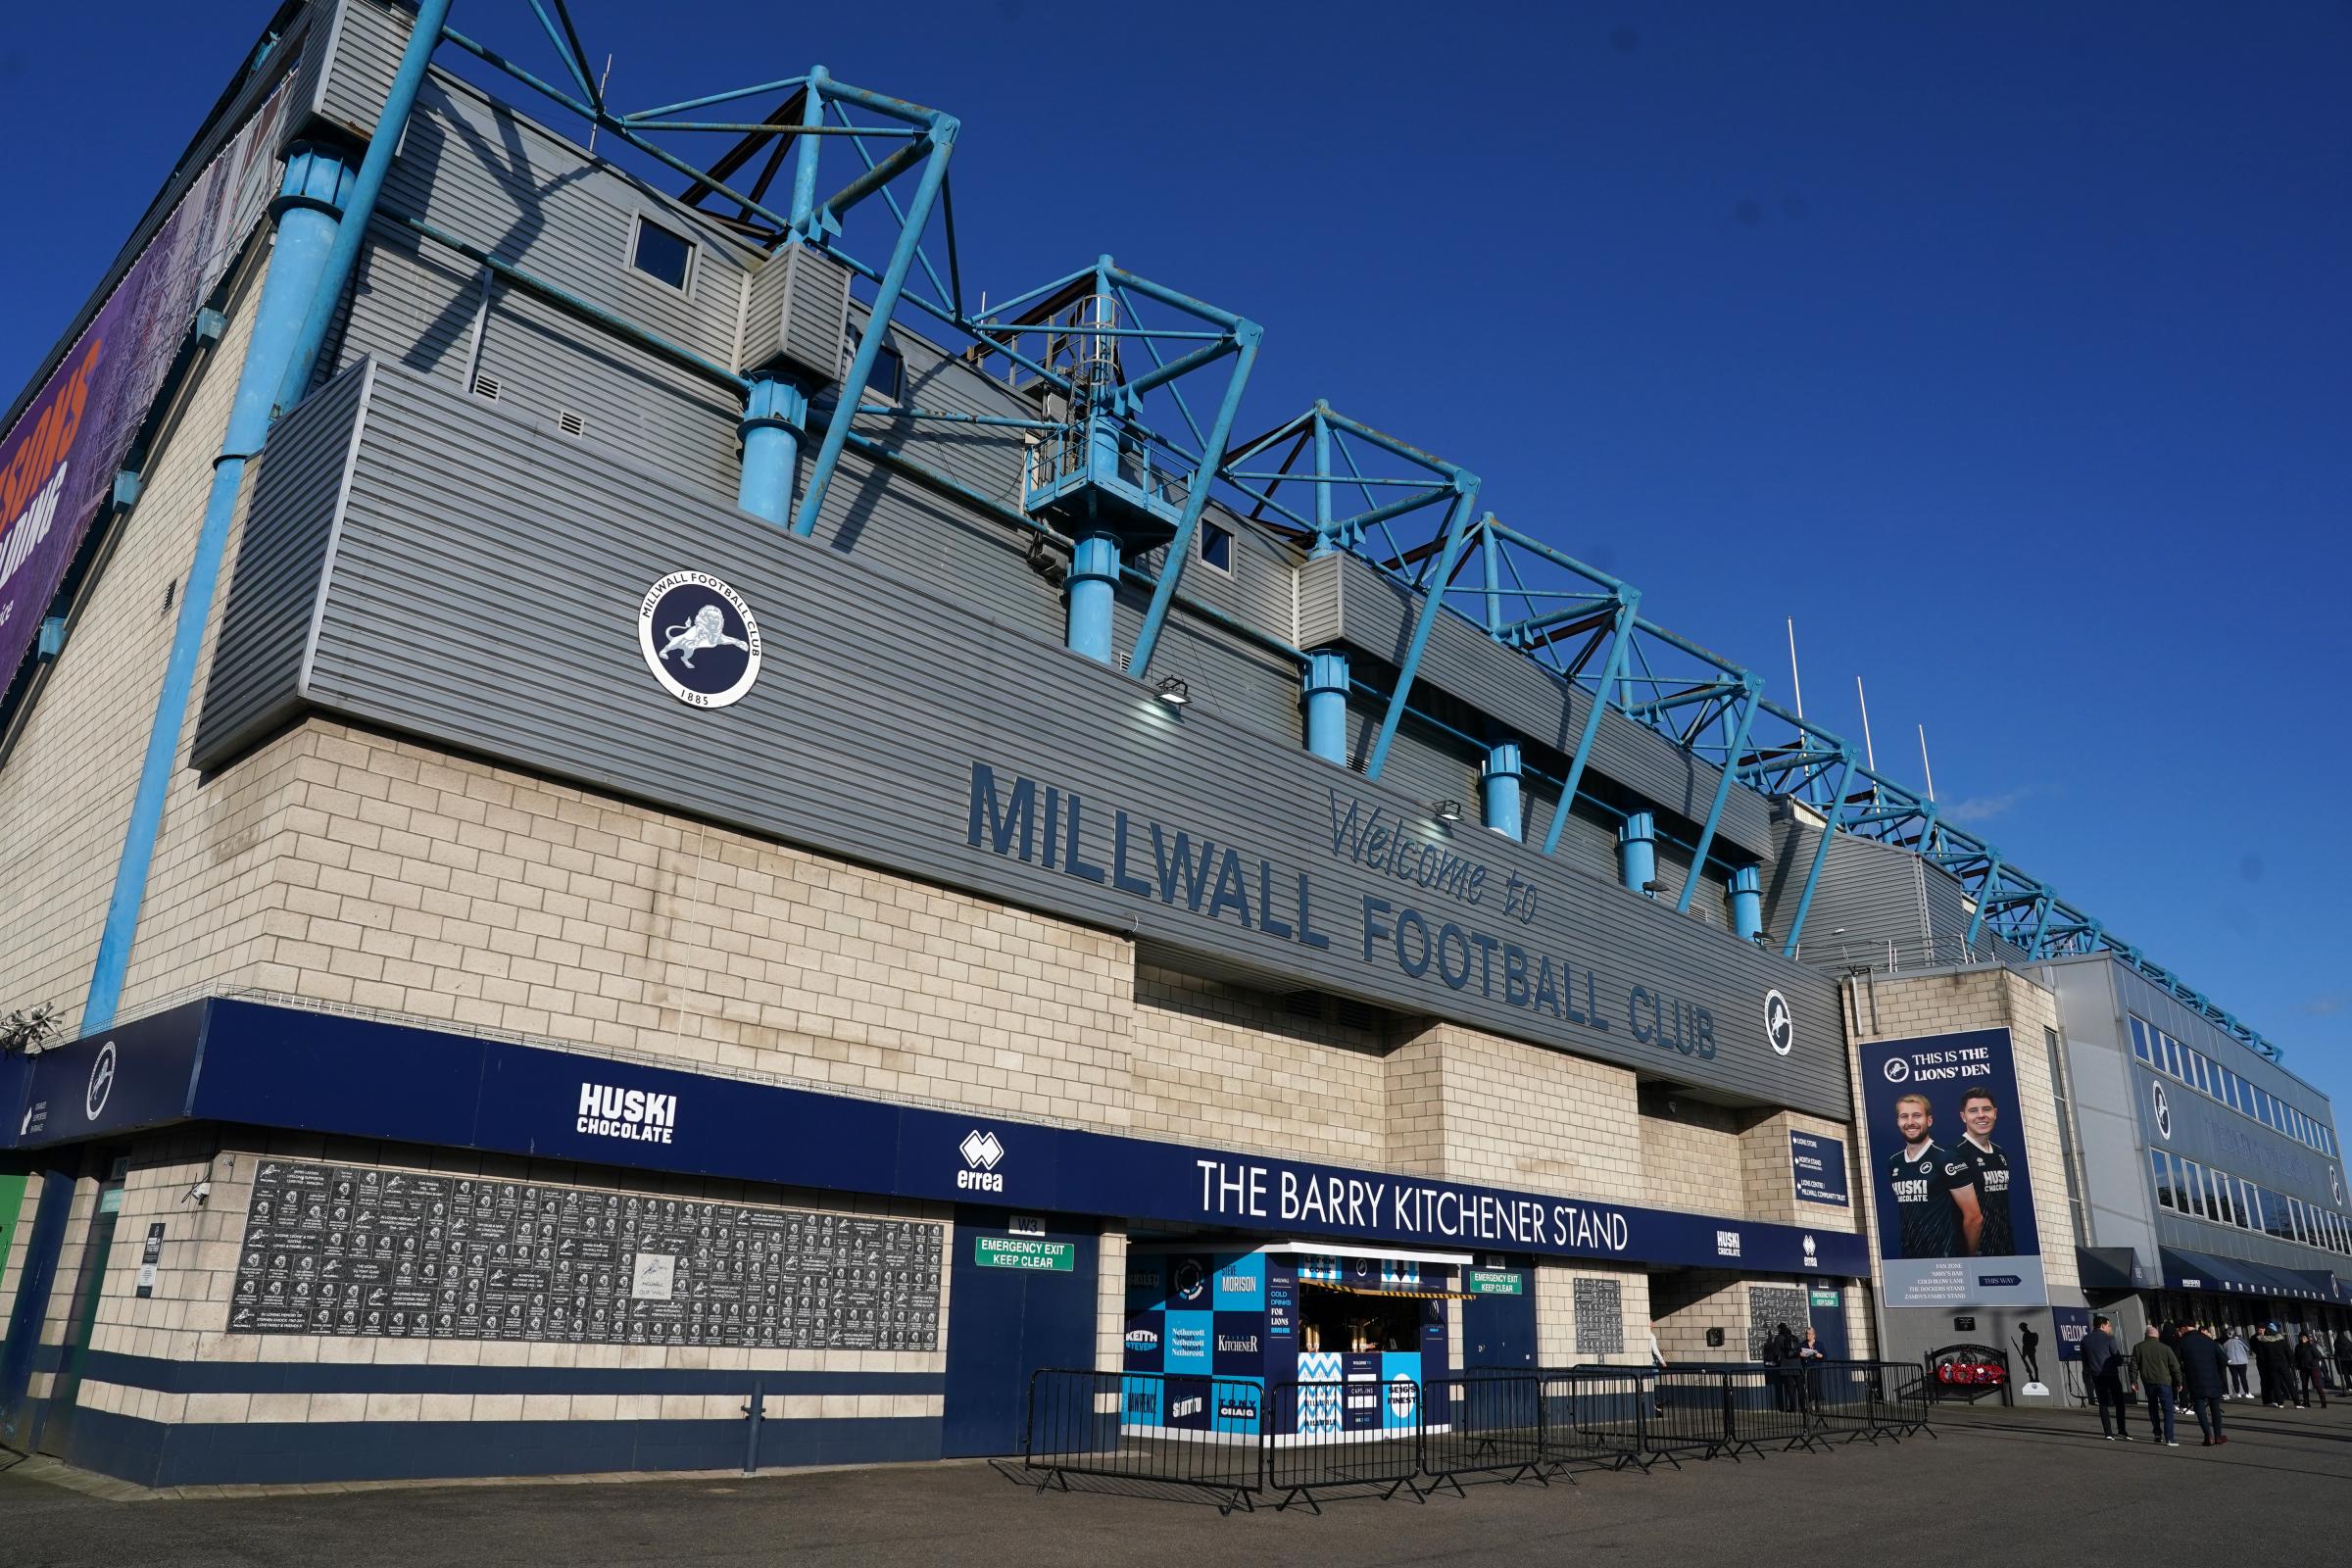 Southampton reveal details of pre-season fixture at Millwall